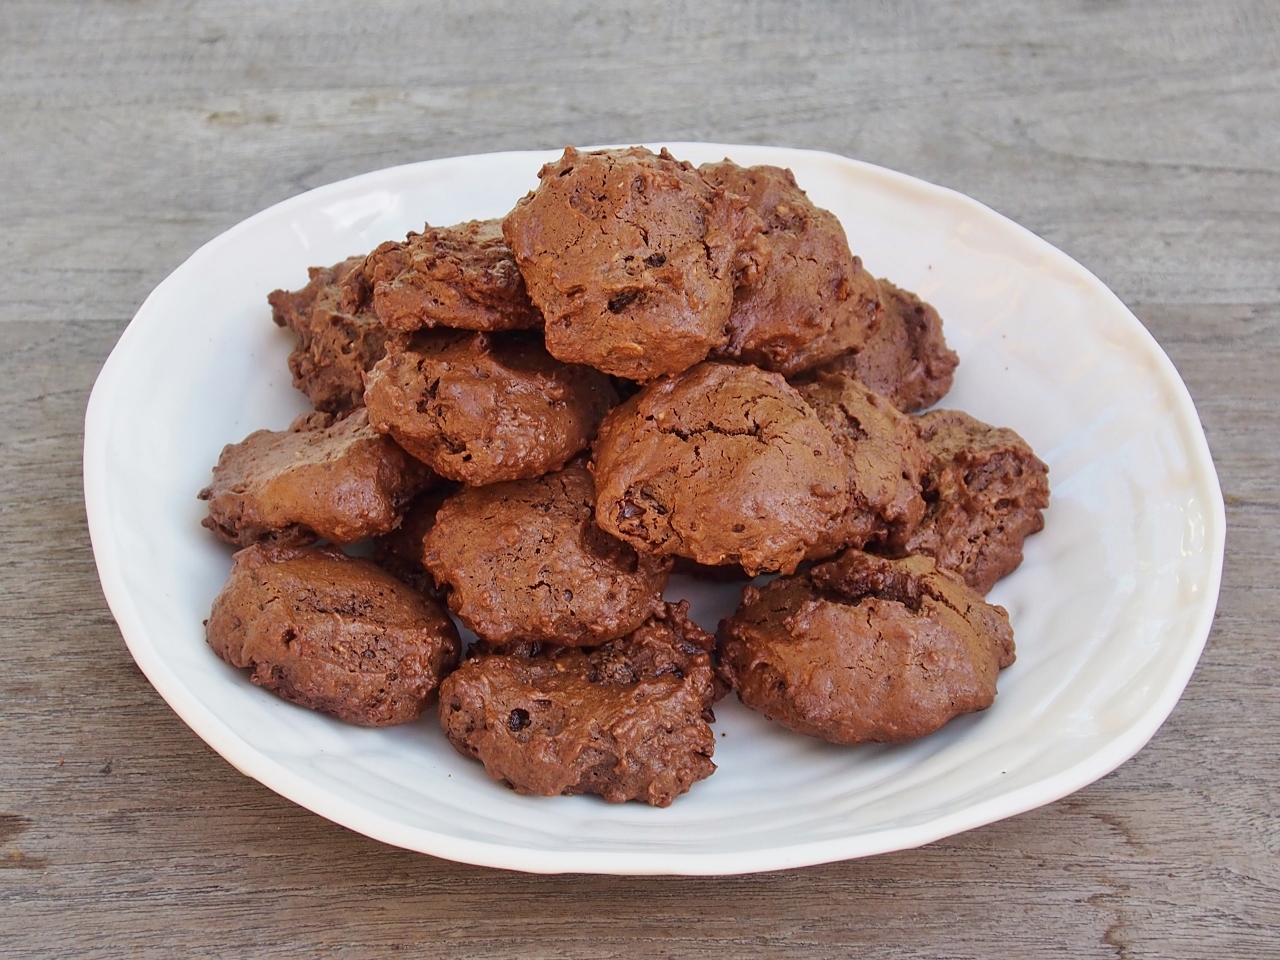 can you believe these are healthy? well healthier than most other chocolate cookies!